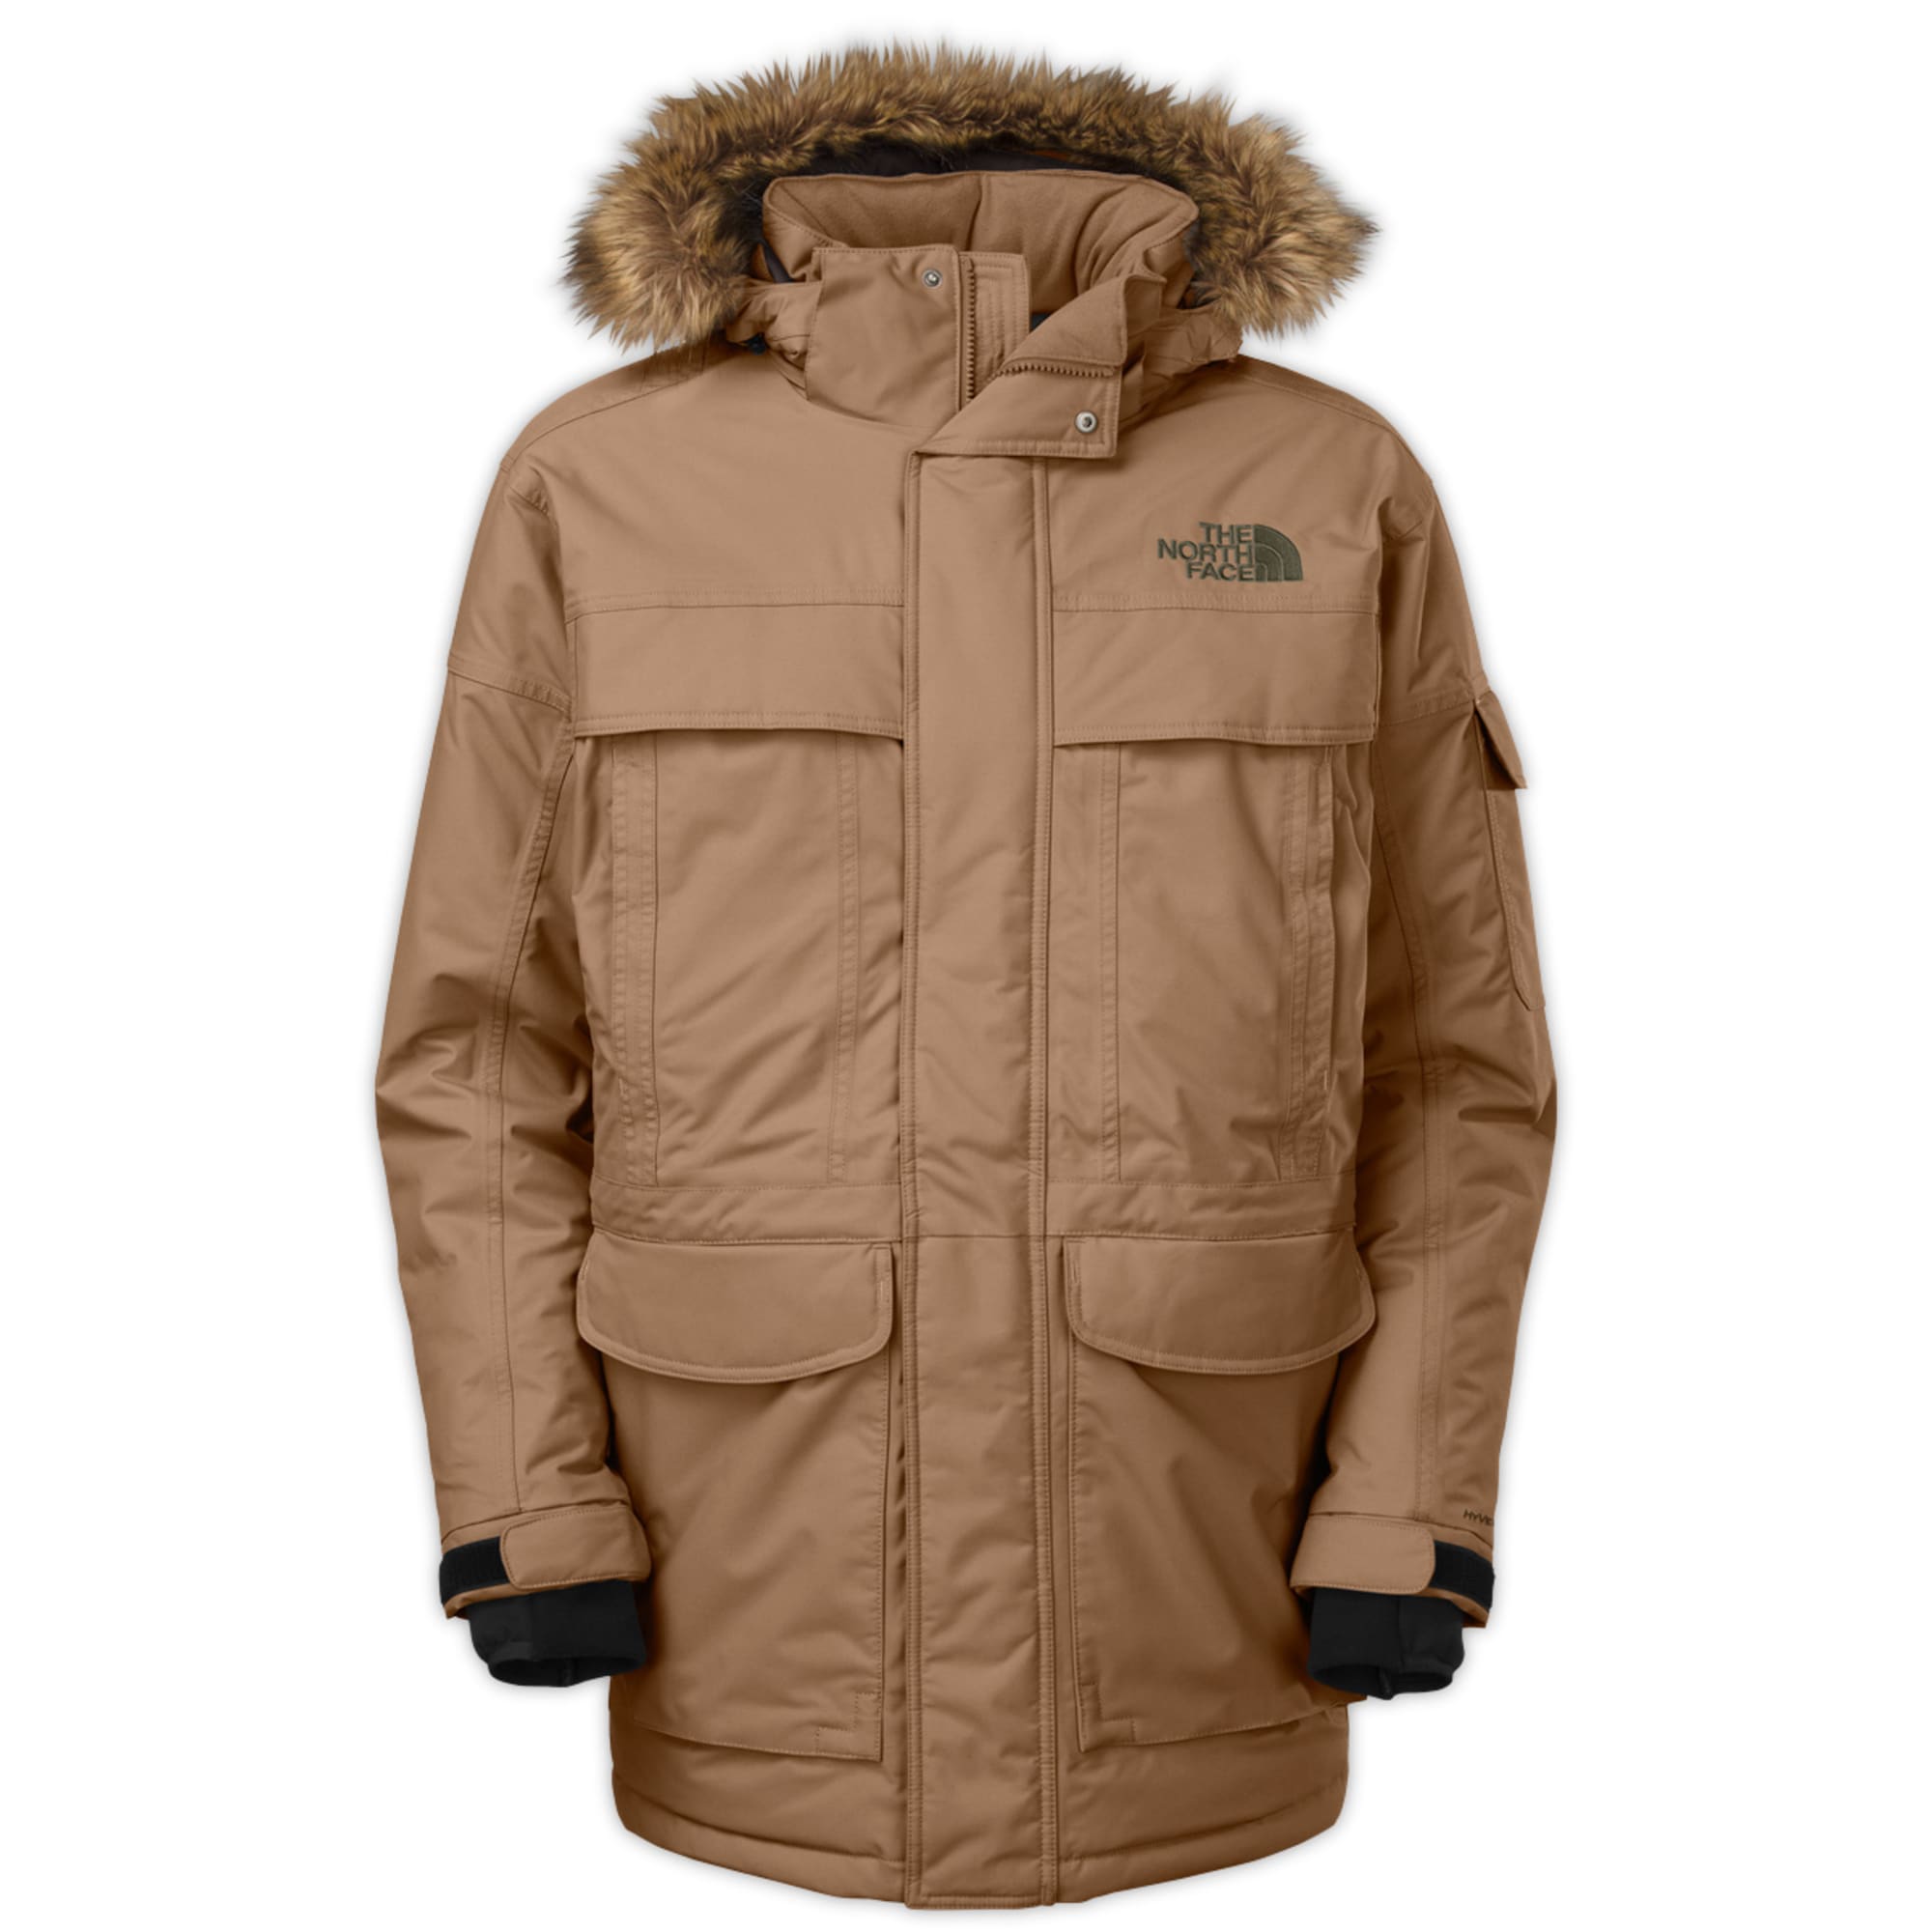 THE NORTH FACE MCMURDO HYVENT GOOSE DOWN WATERPROOF PARKA JACKET – MEN’S L  